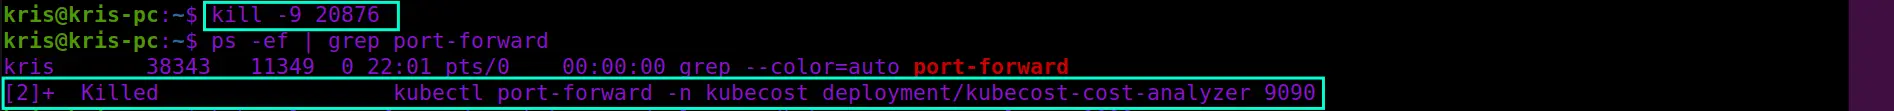 Screenshot of the kill command output that terminated the process holding an orphaned port from being cleaned up